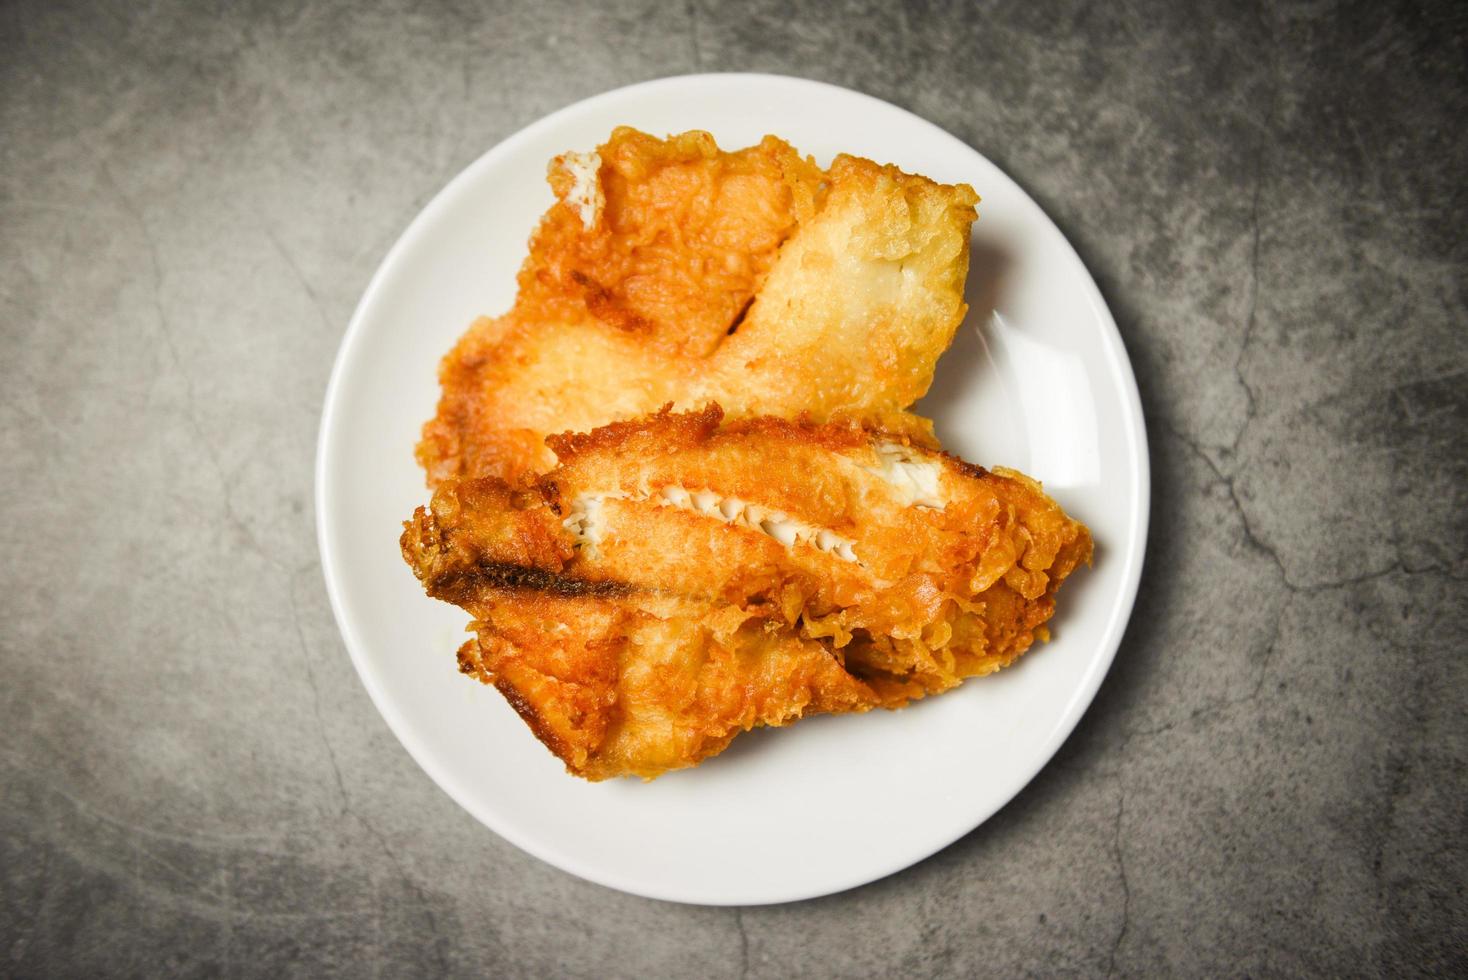 fried fish fillet sliced for steak or salad cooking food , top view copy space - tilapia fillet fish crispy served on white plate photo